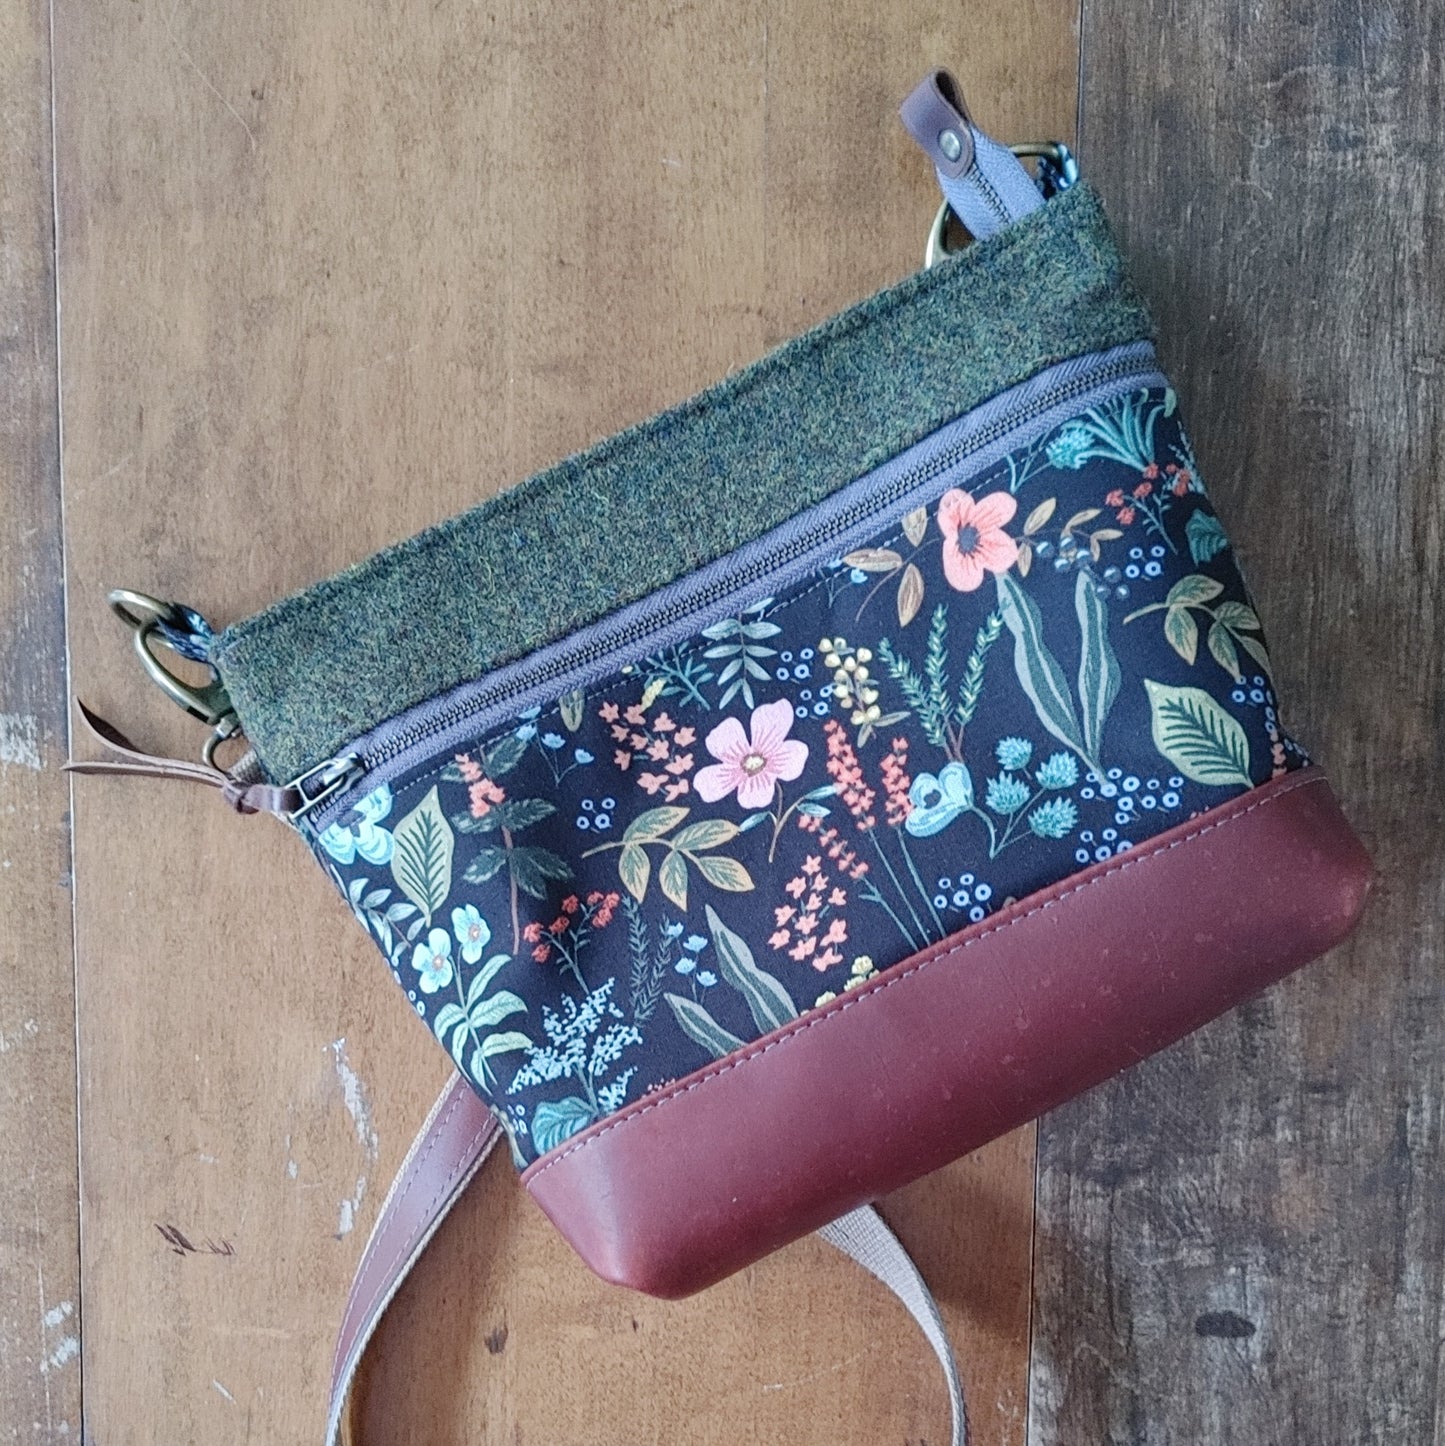 Crossbody Bag in Leather, Floral Canvas and Harris Tweed.